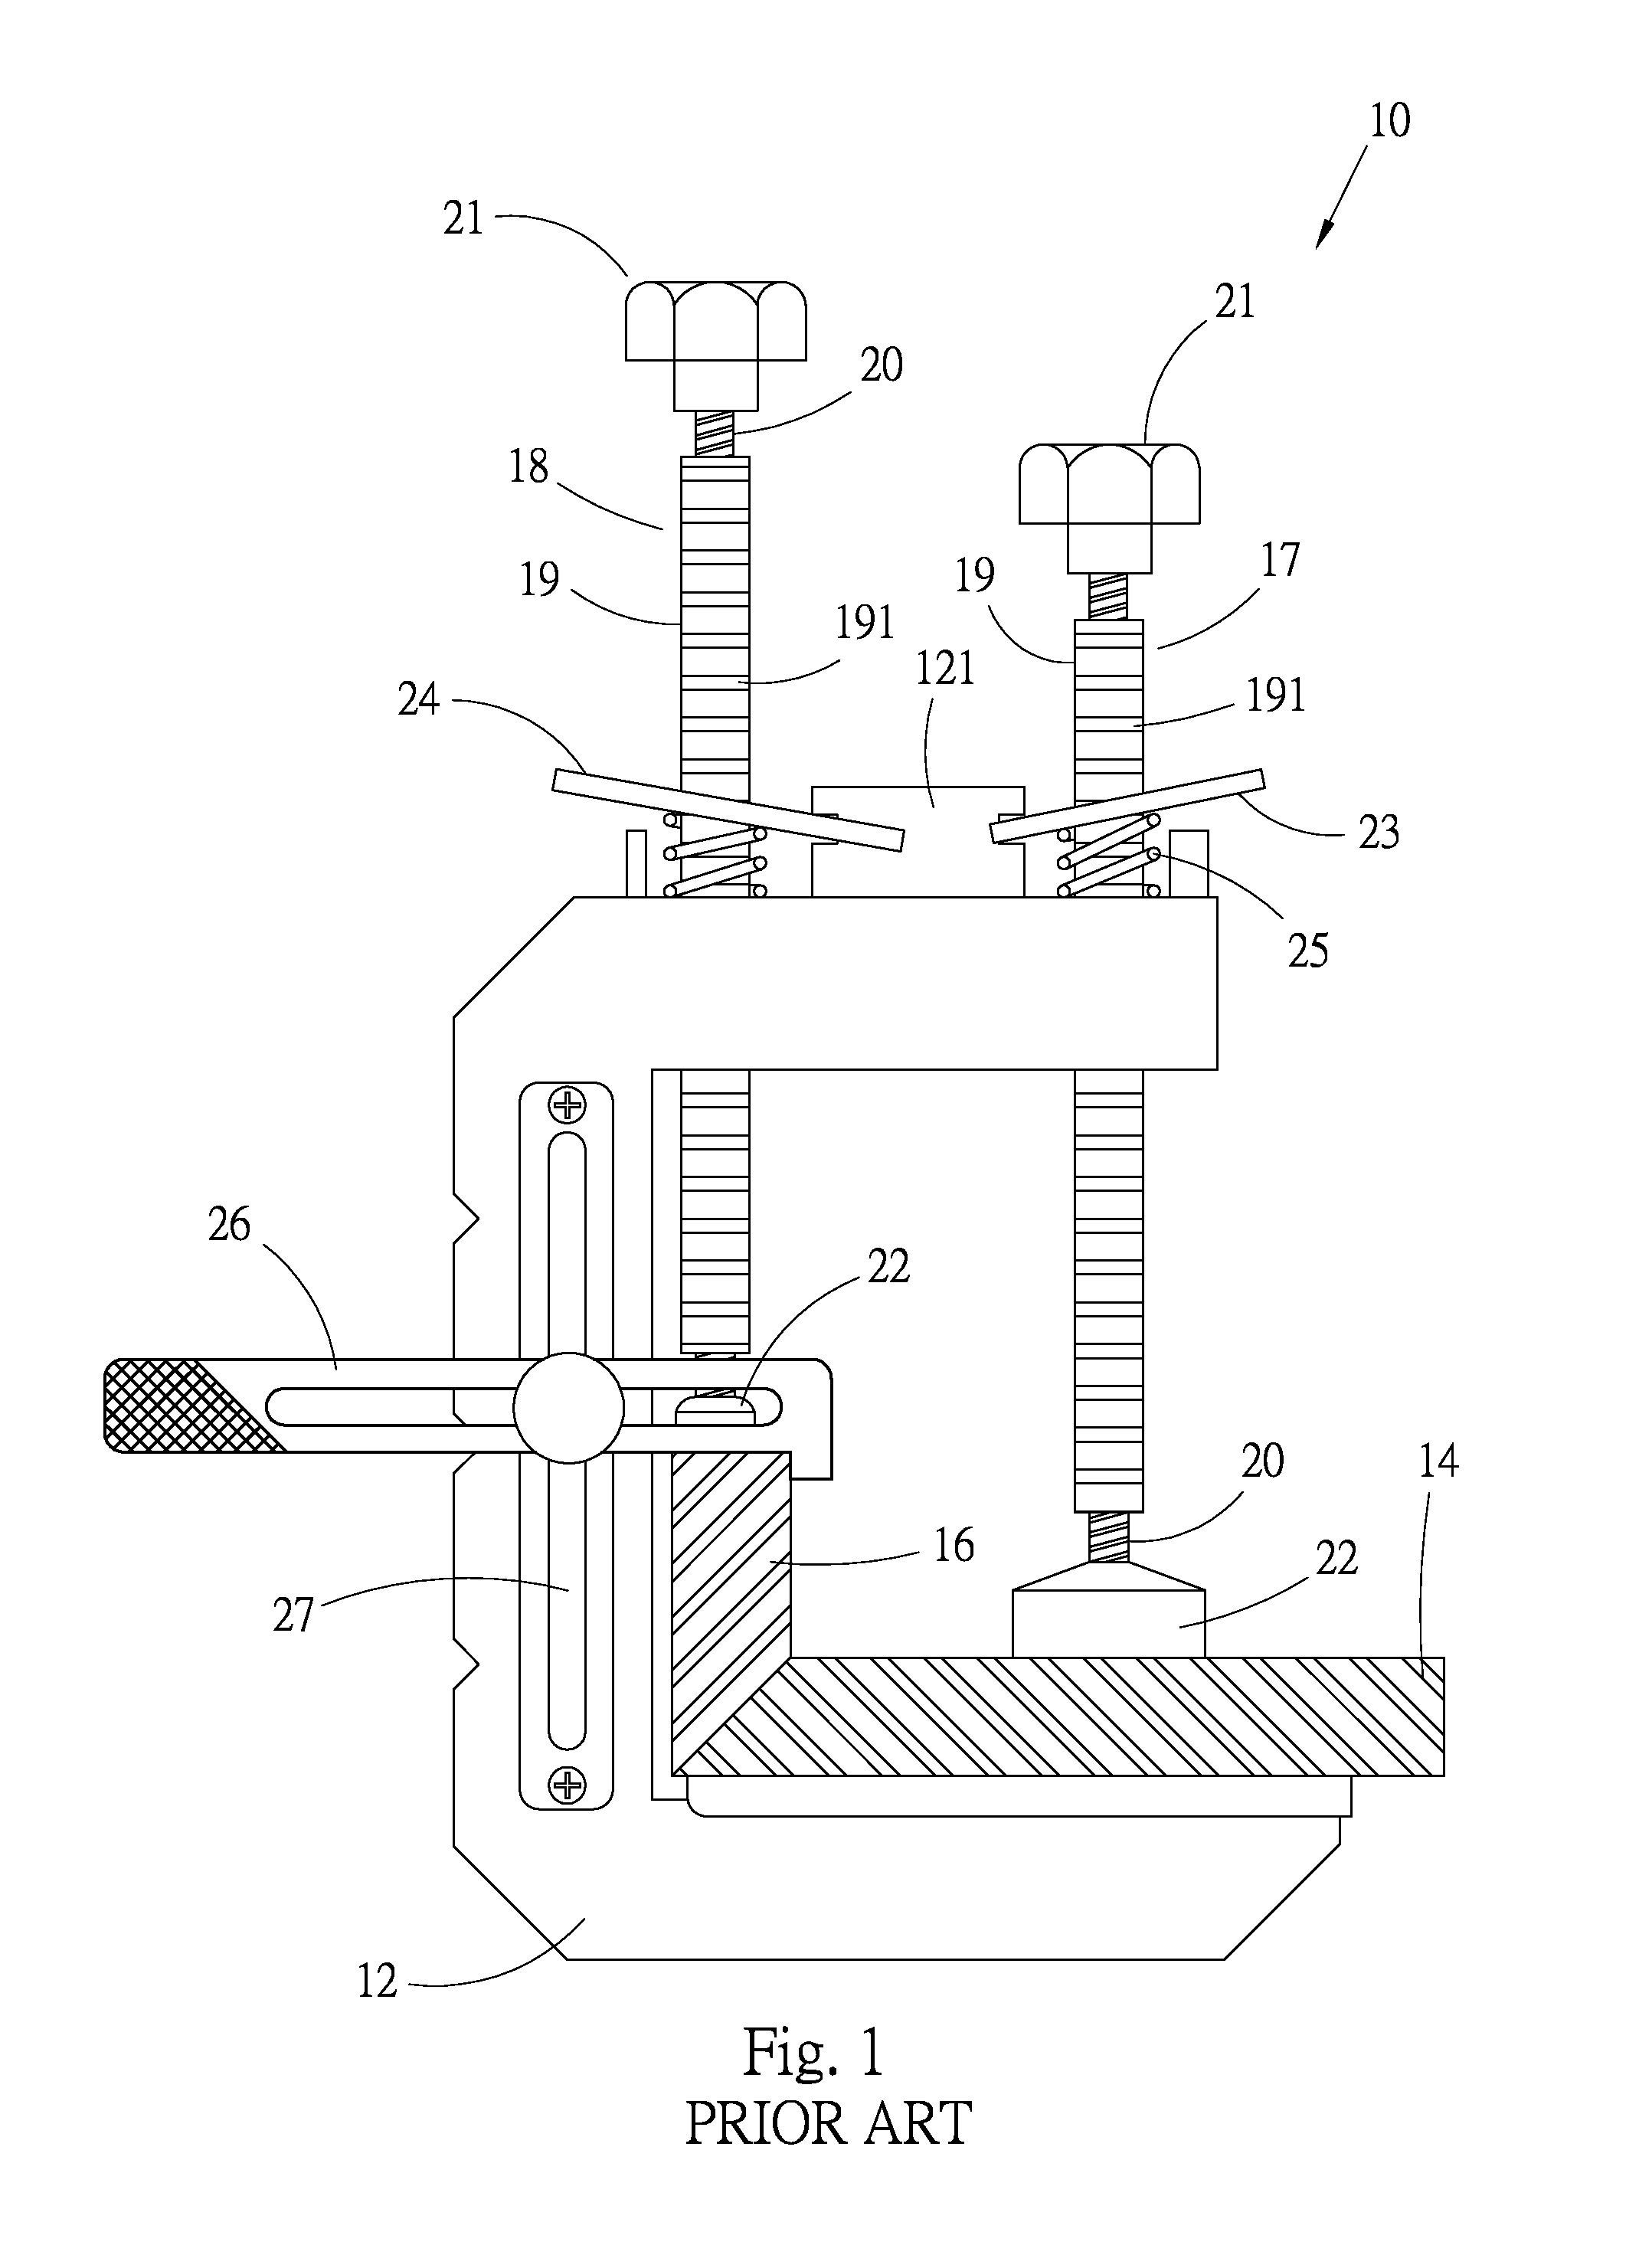 Clamping device for adjoining board materials